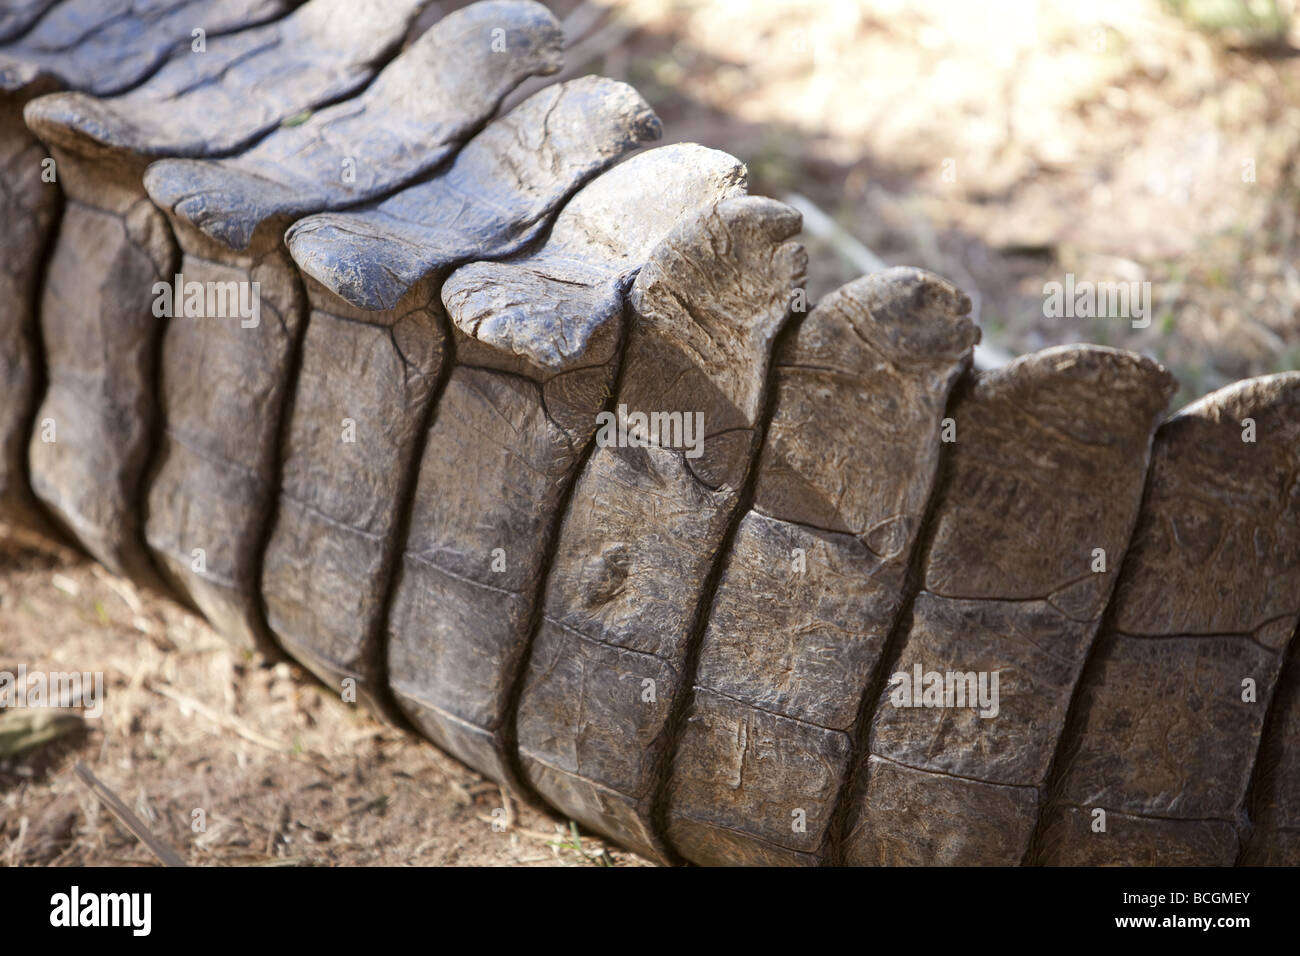 Close up shot of the scales on a Nile Crocodile's tail Stock Photo